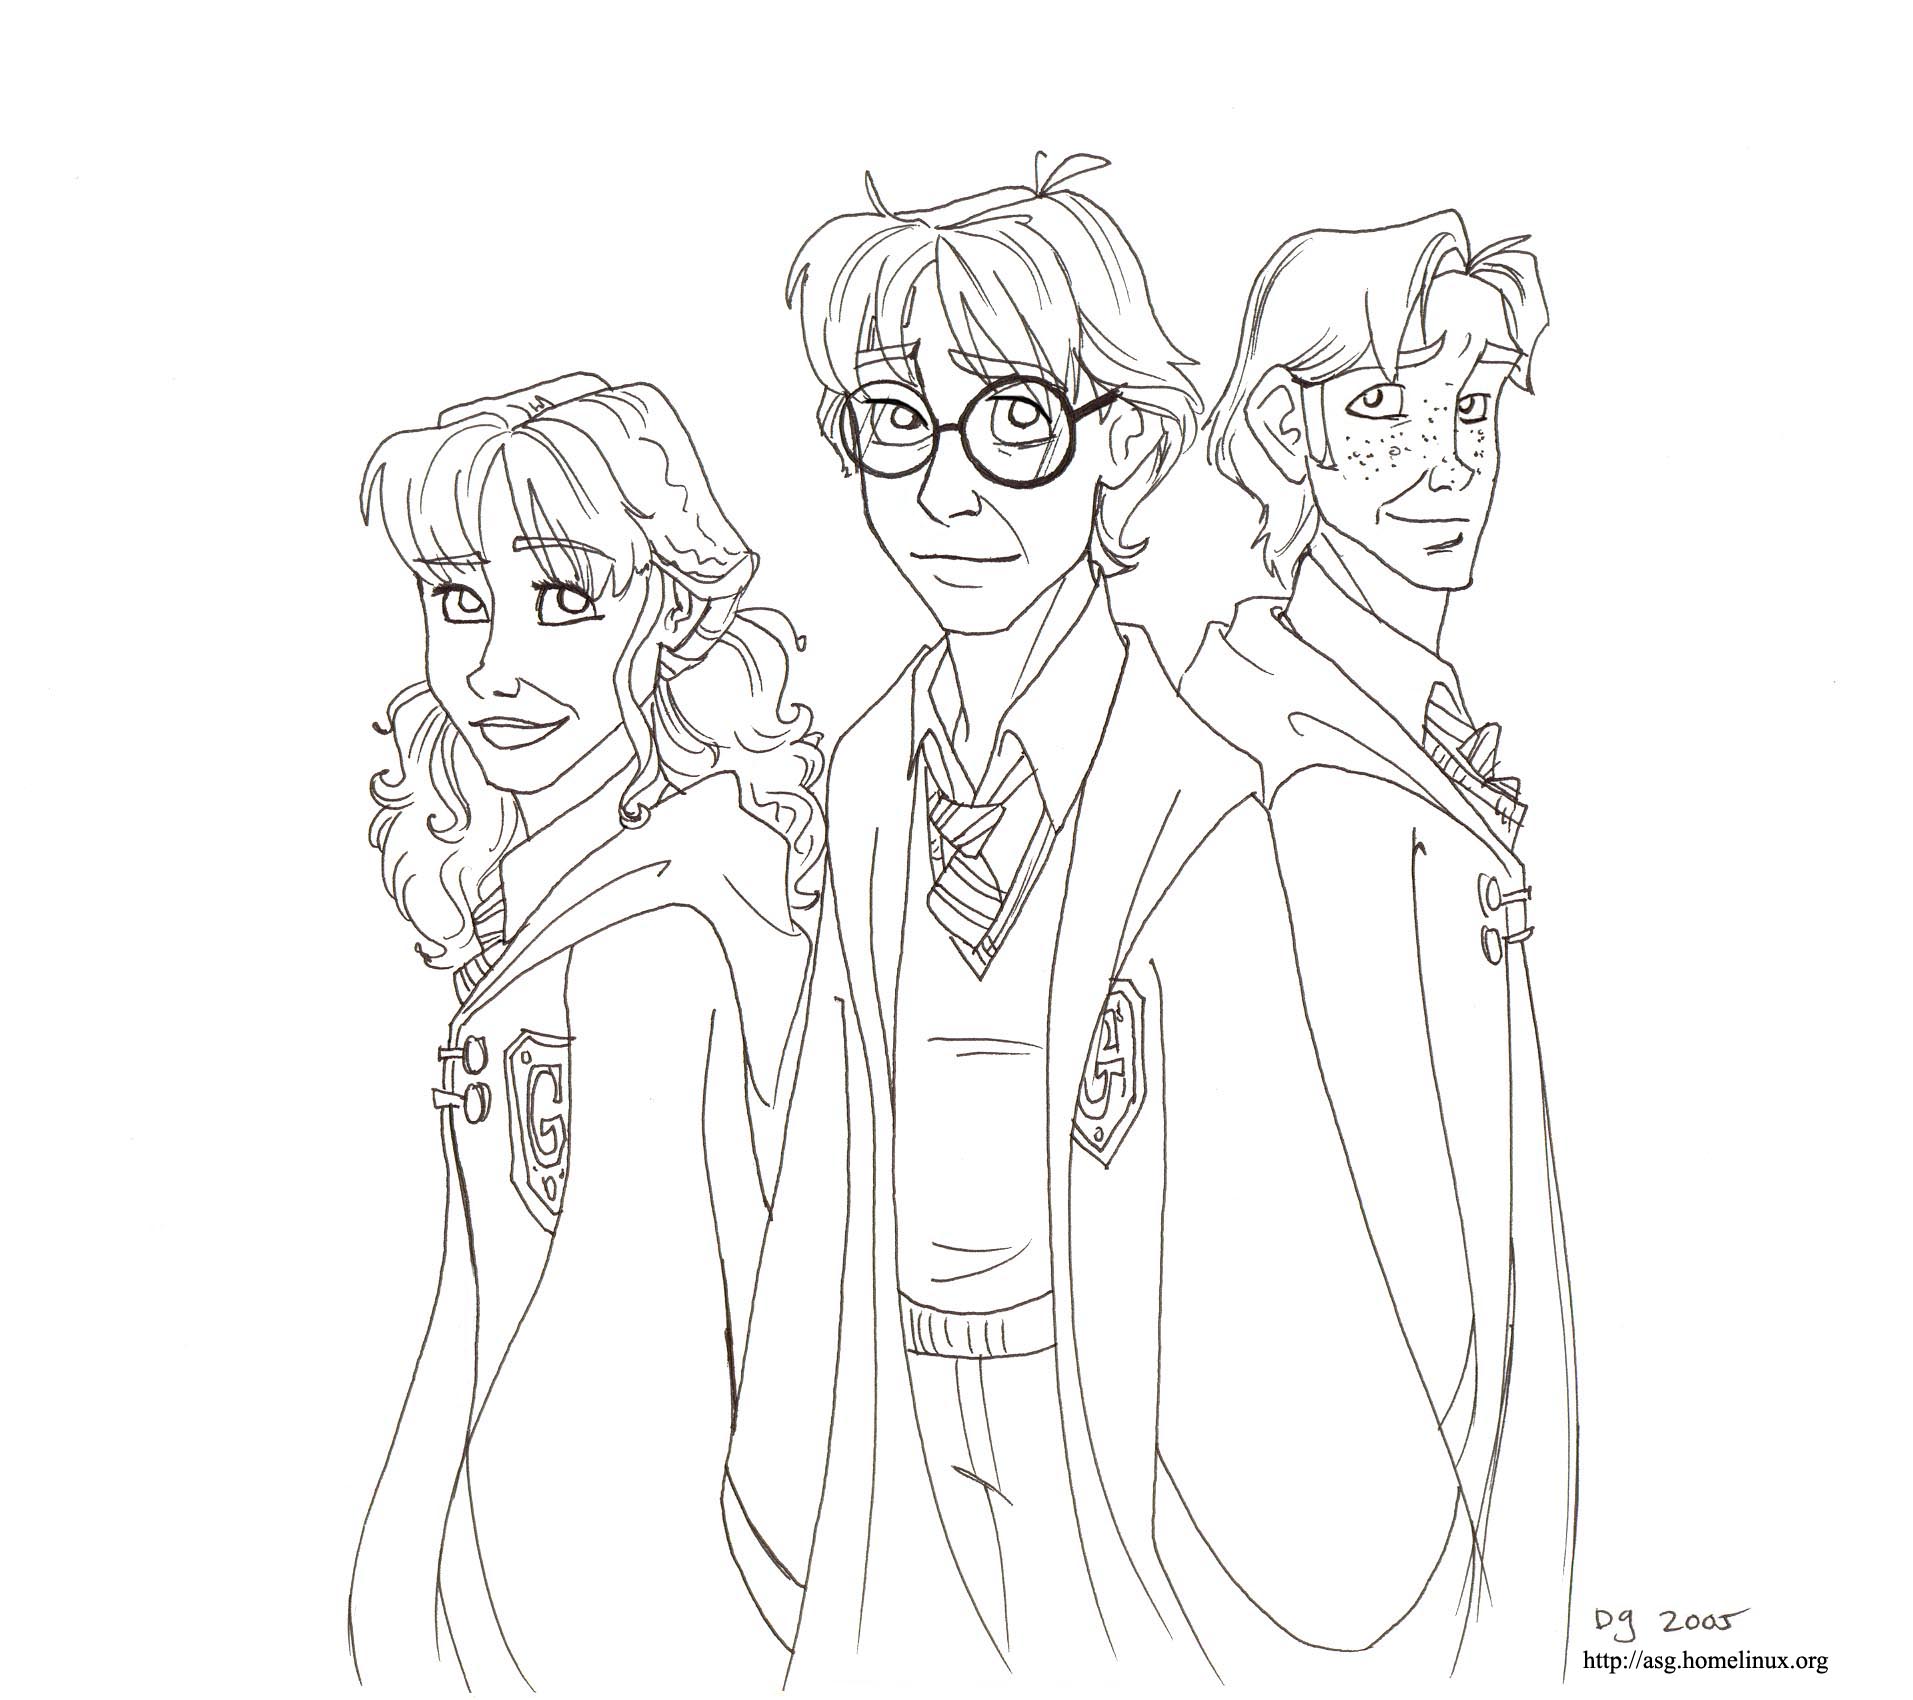 Hermione, Harry and Ron. 6th Year